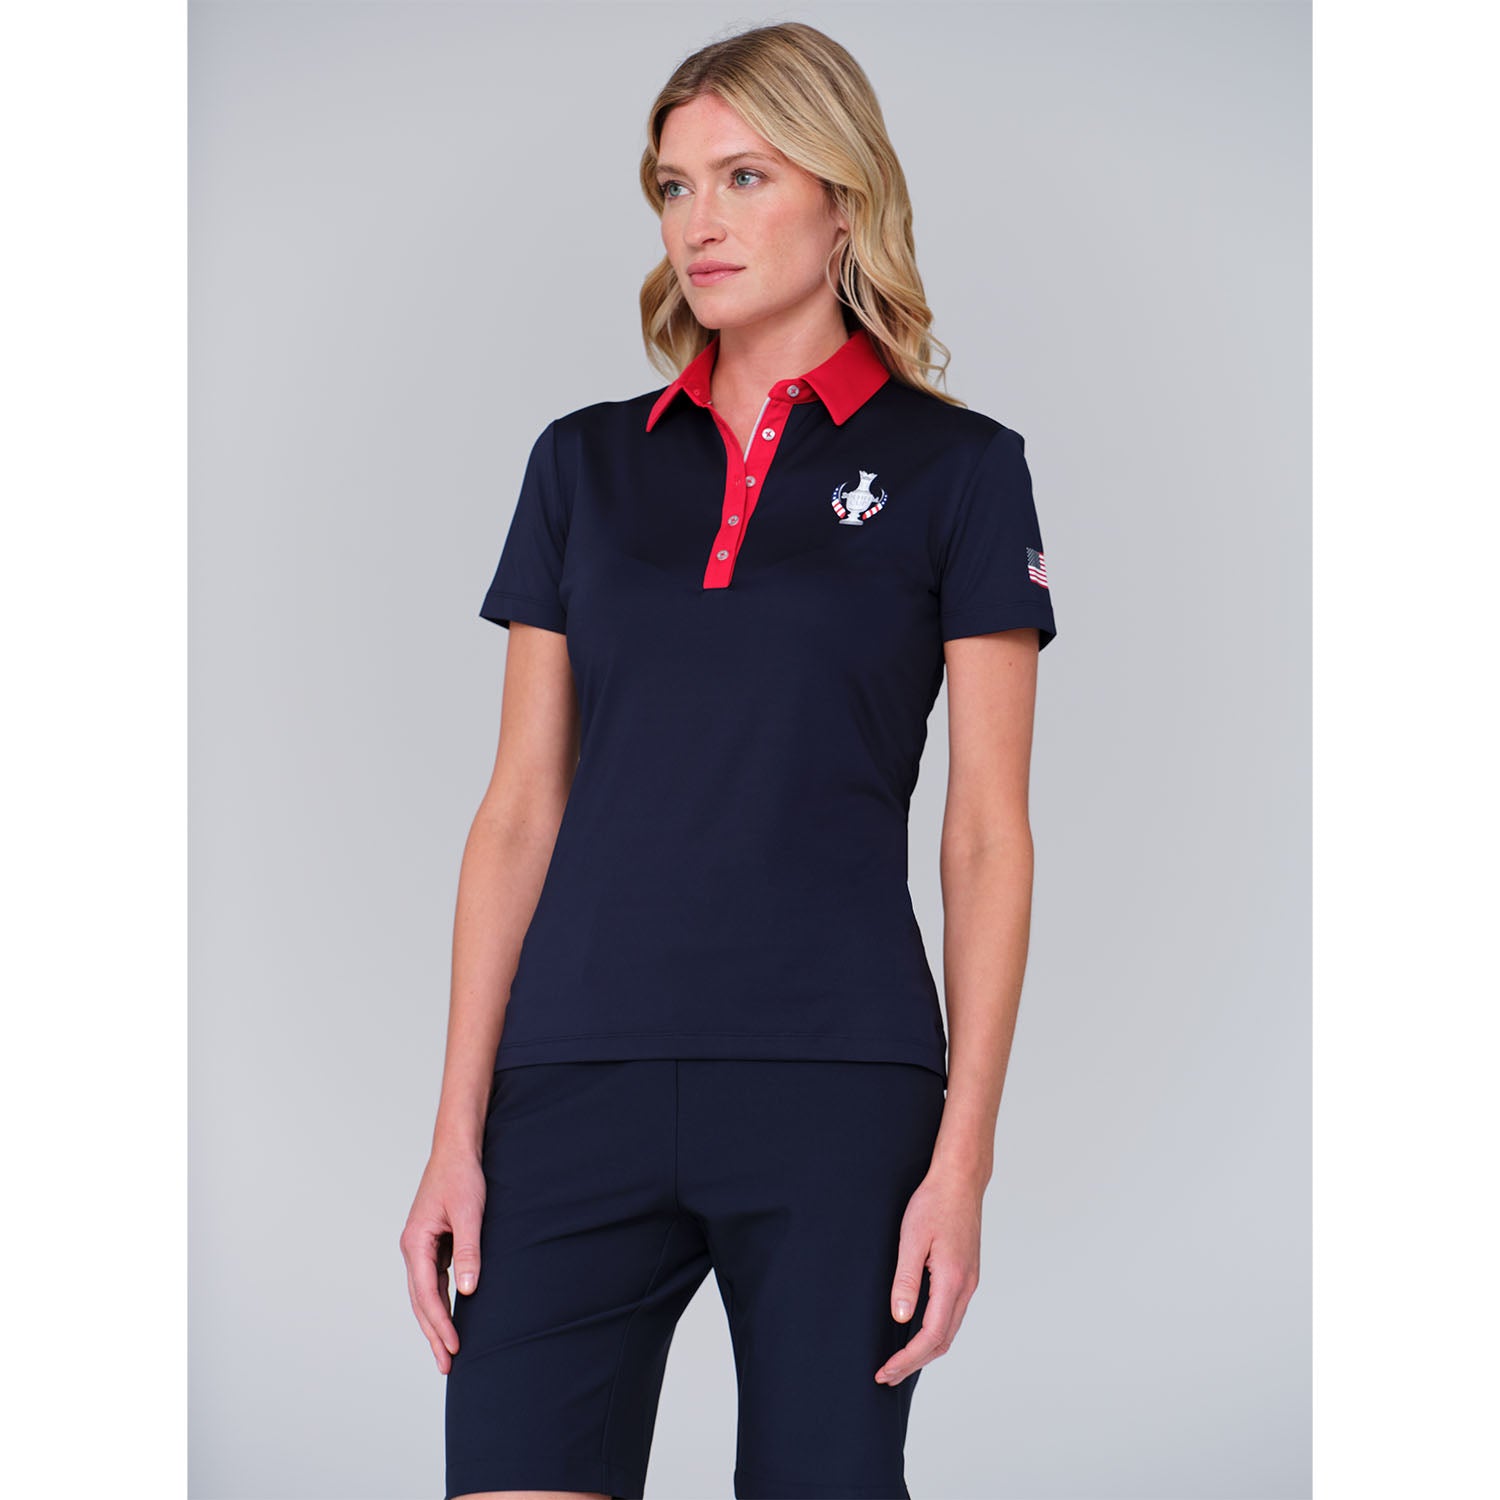 Dunning 2023 LPGA Official Solheim Cup Team Uniform Women's Short Sleeve Performance Polo in Halo / Glory - Lifestyle Front View